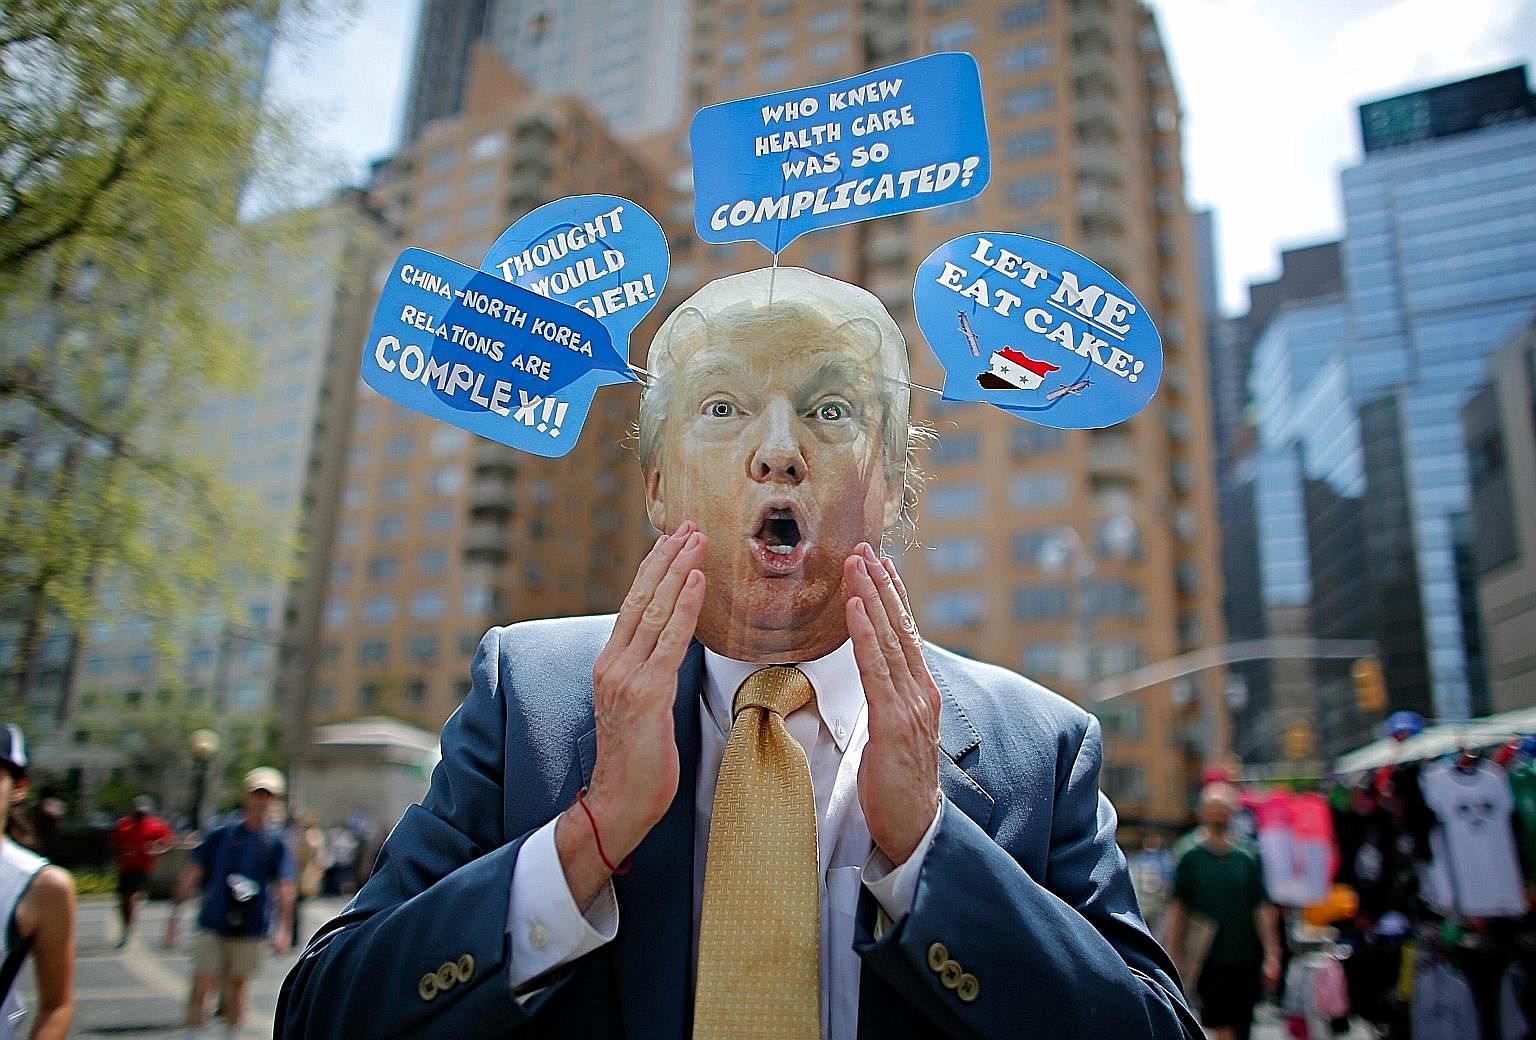 A man in New York wearing a Donald Trump mask taking part in the "100 Days of Failure" protest on April 29. The surprises from the Trump administration's first 100 days have been both positive and negative.